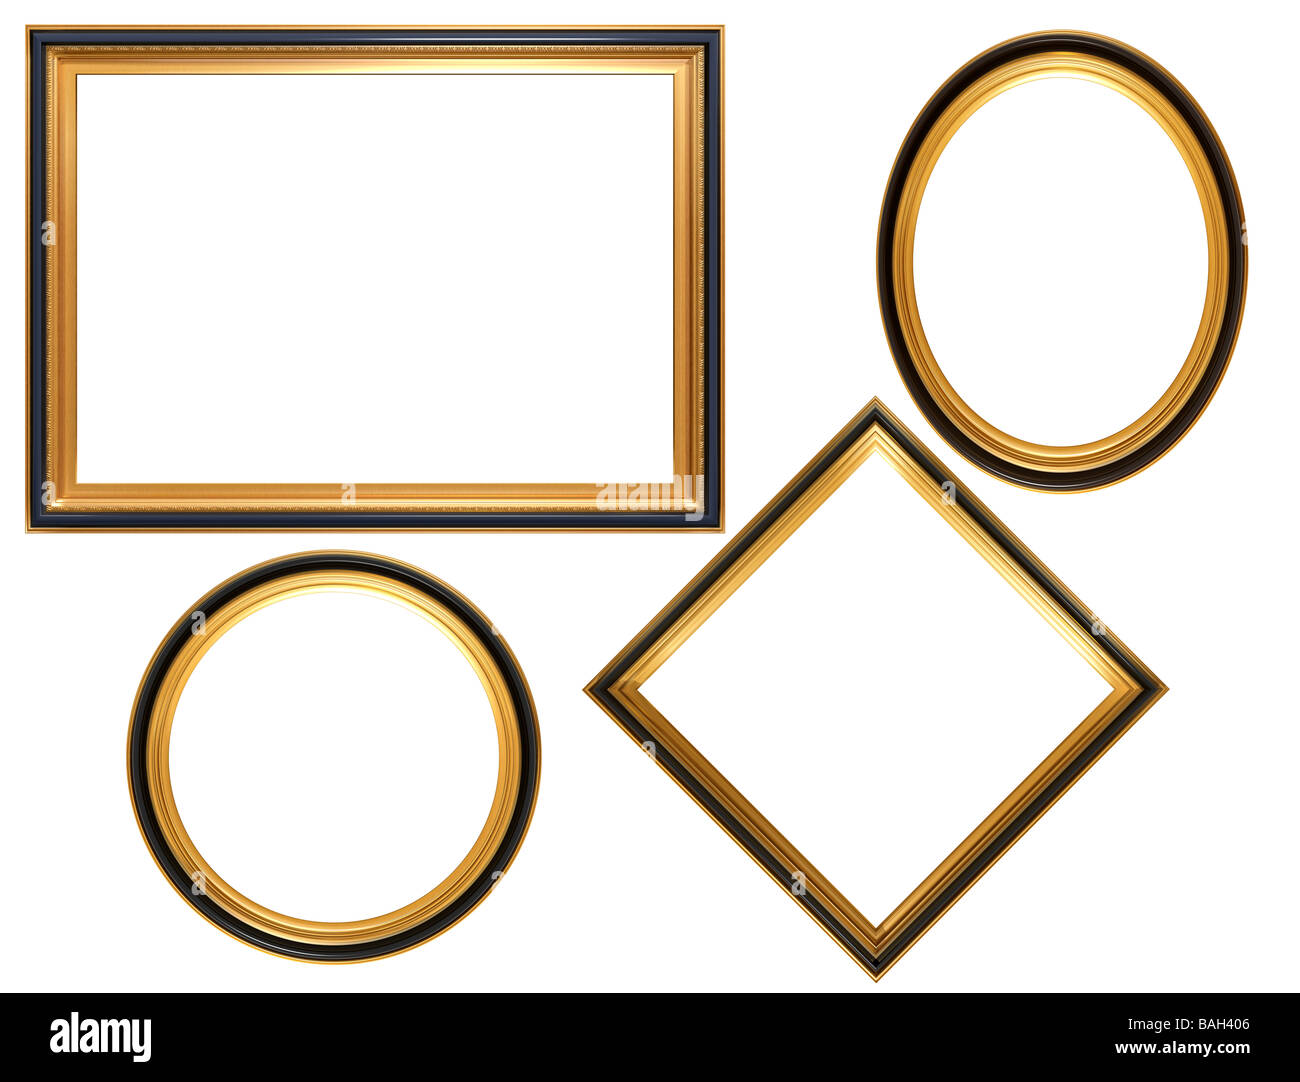 Isolated illustration of a collection of Georgian picture frames Stock Photo